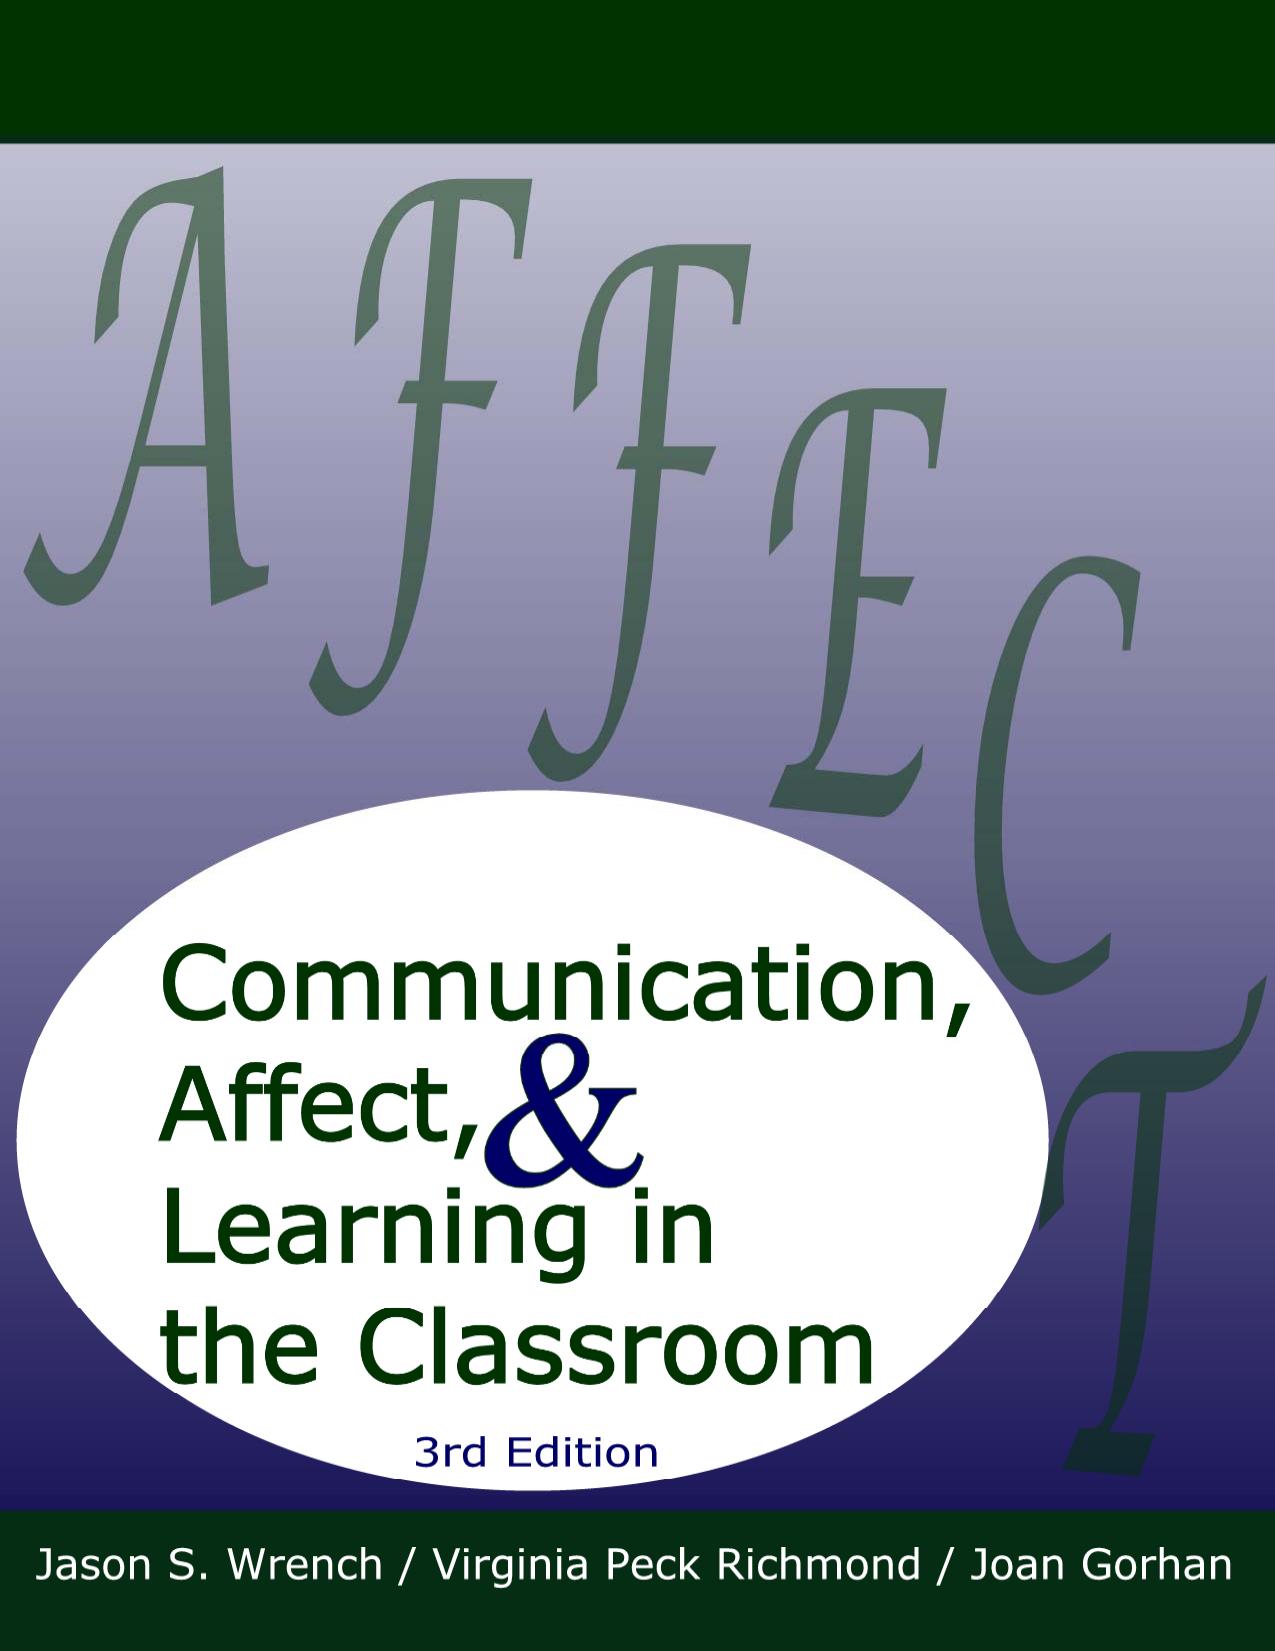 Microsoft Word - Communication Affect and Learning.doc